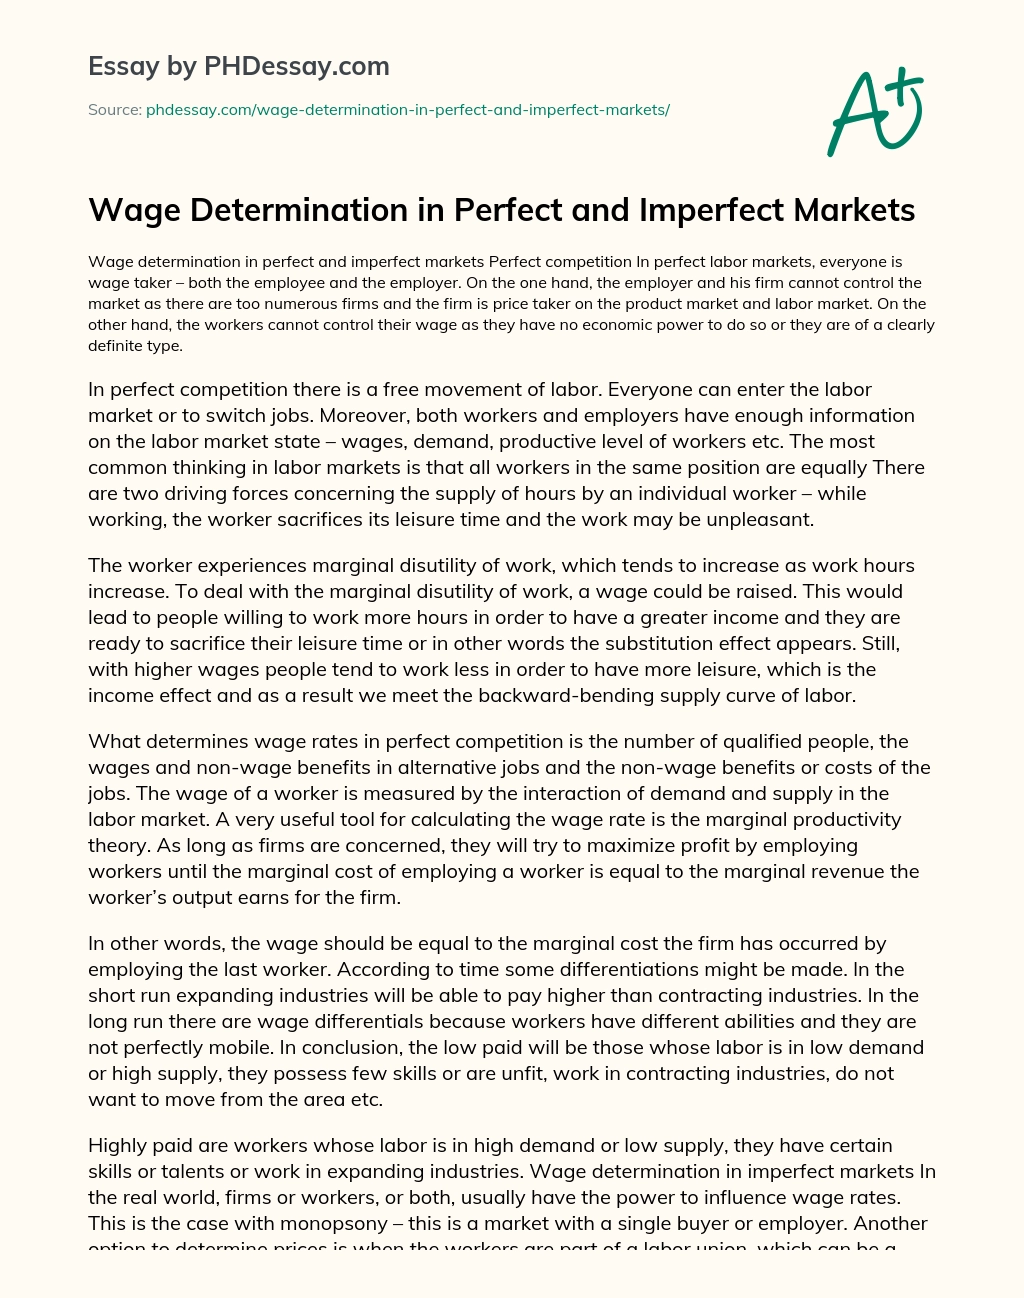 Wage Determination in Perfect and Imperfect Markets essay